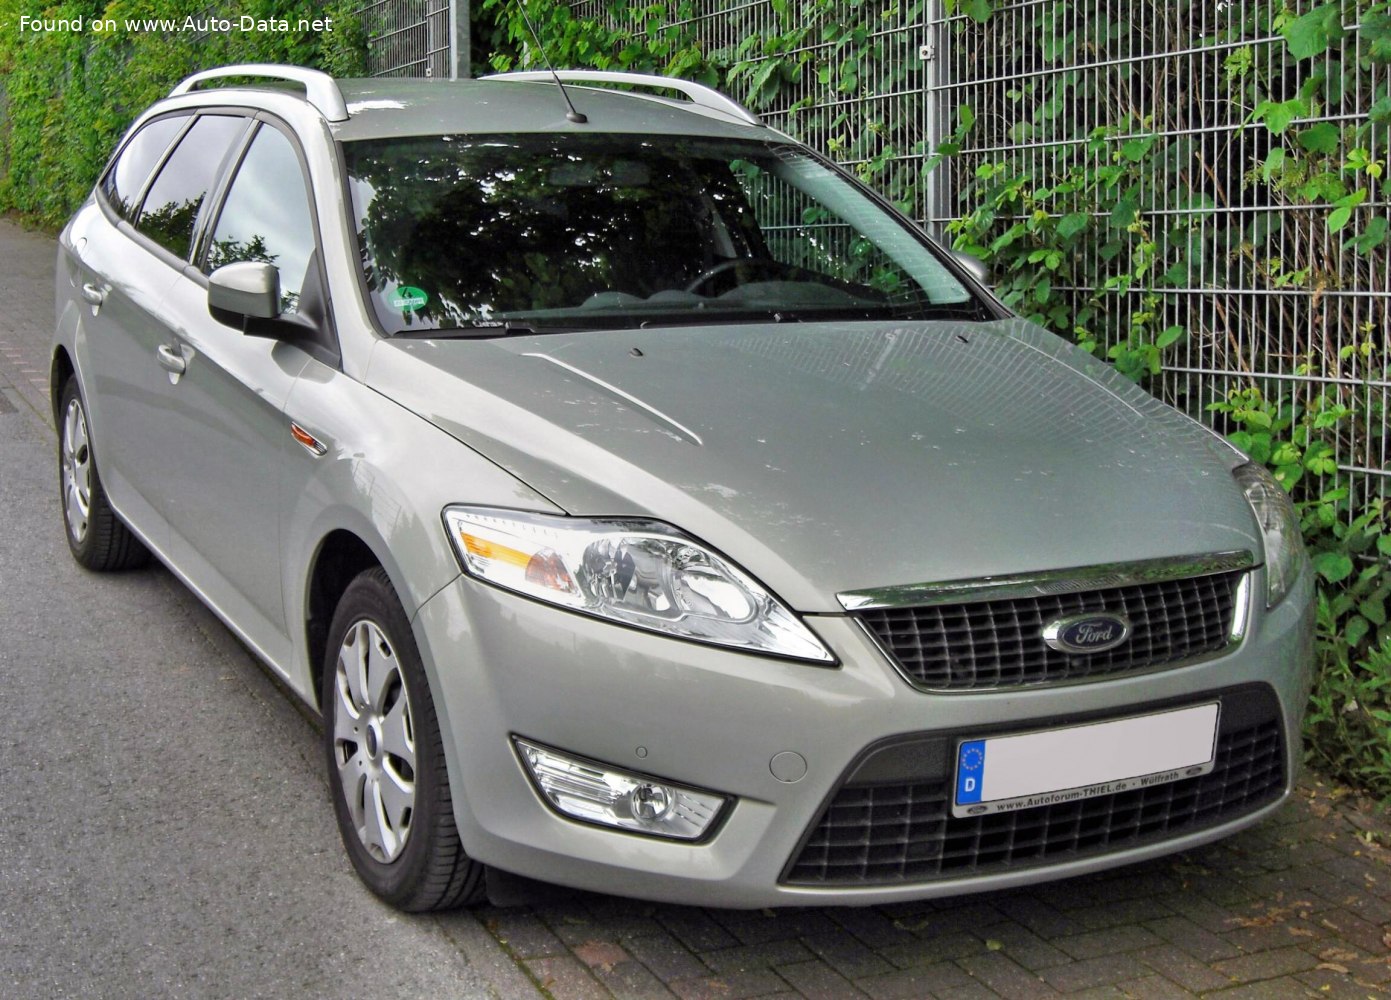 2007 Ford Mondeo Iii Wagon Technical Specs Fuel Consumption Dimensions